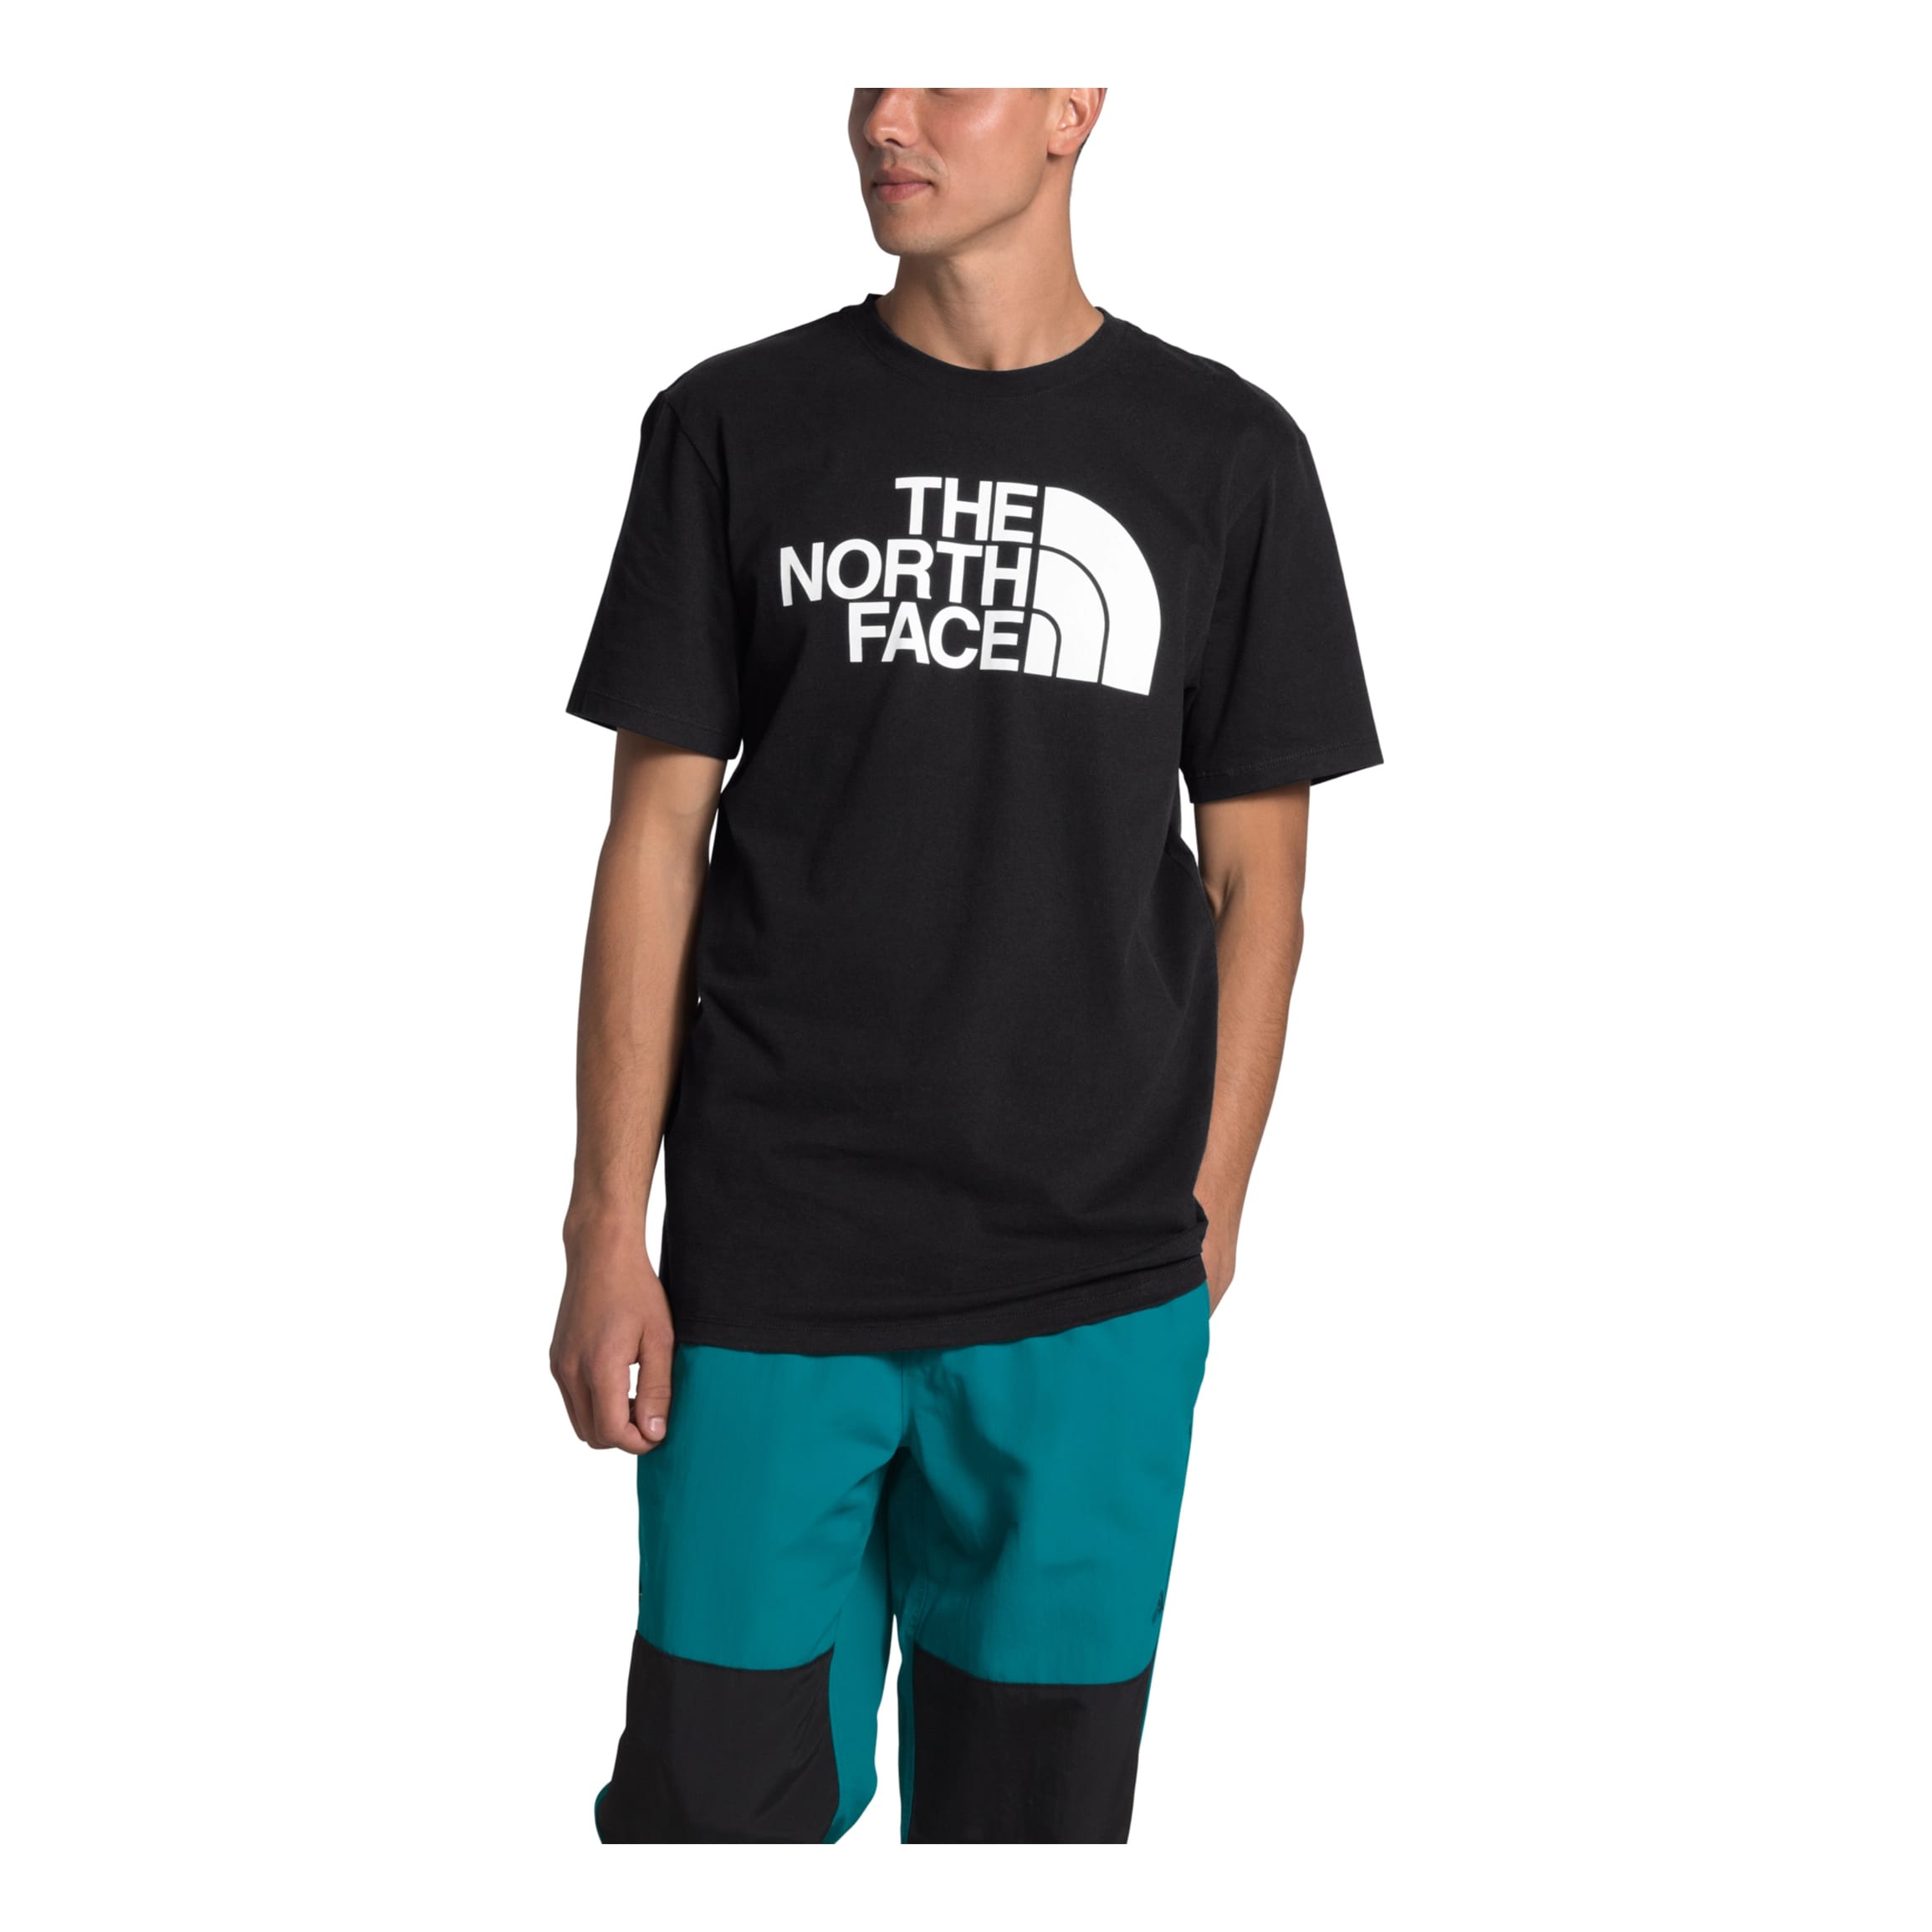 The North Face® Half Dome Short-Sleeve T-Shirt